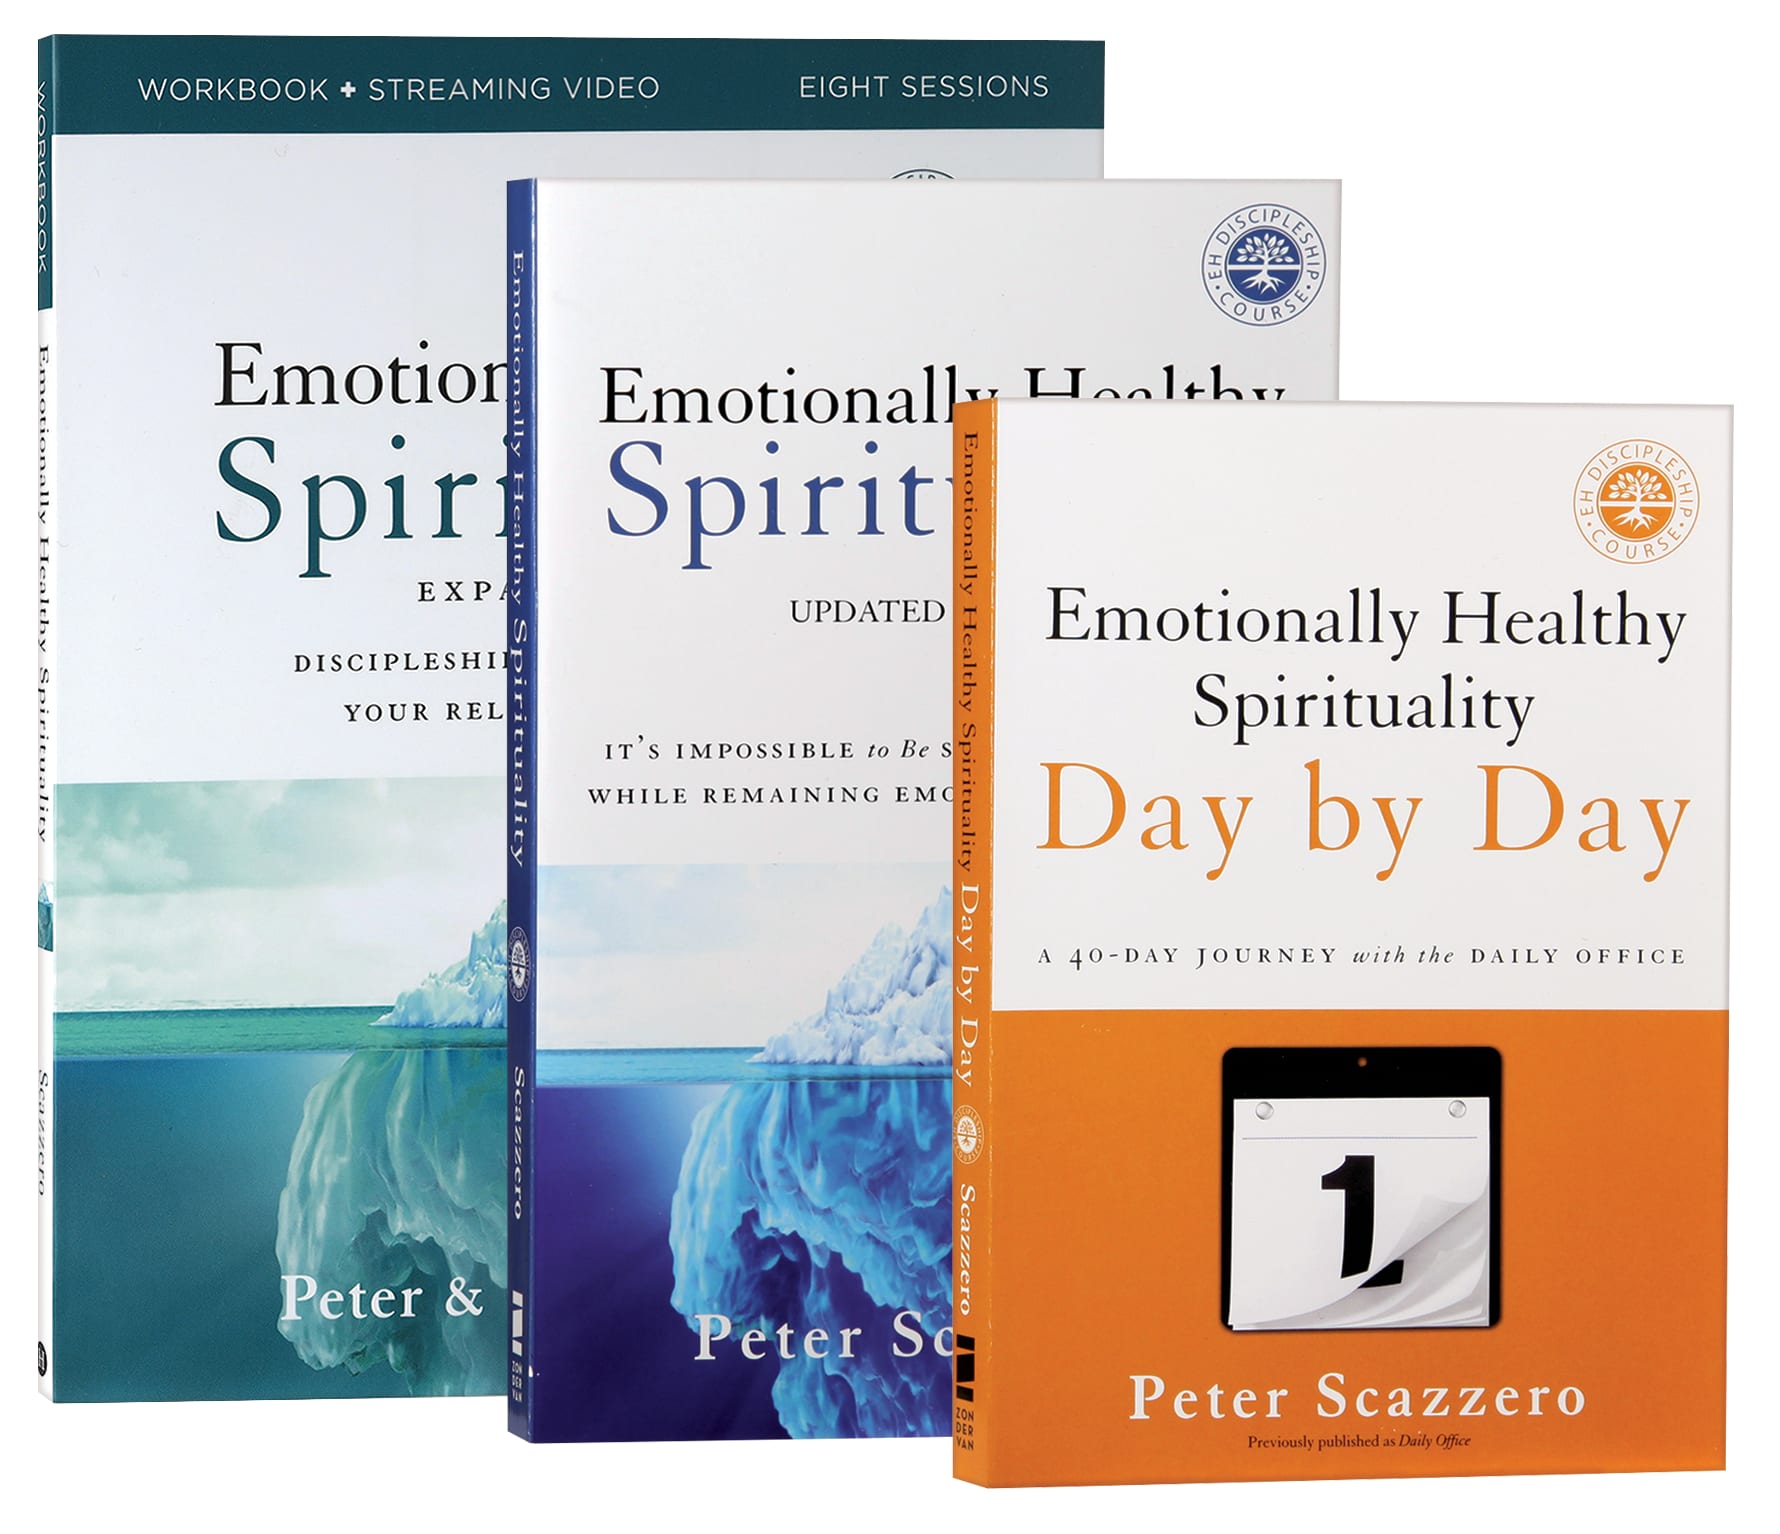 Deeply　Relationship　Edition)　Emotionally　Healthy　Changes　With　Expanded　Your　Spirituality　Course:　Pack　(Participant's　Discipleship　God　That　Koorong